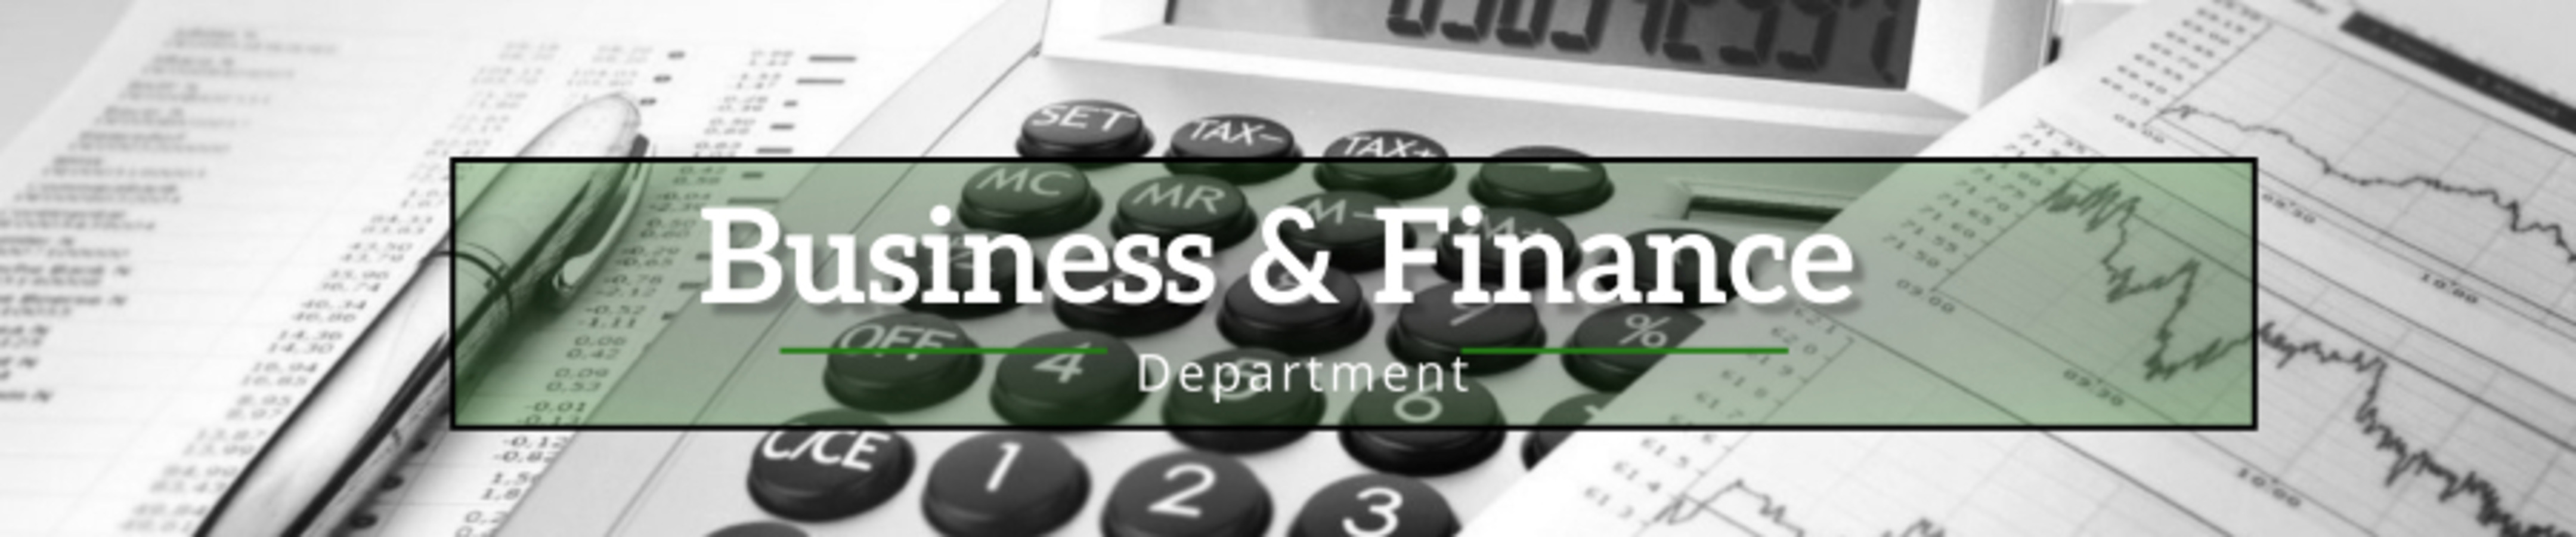 business & finance graphic